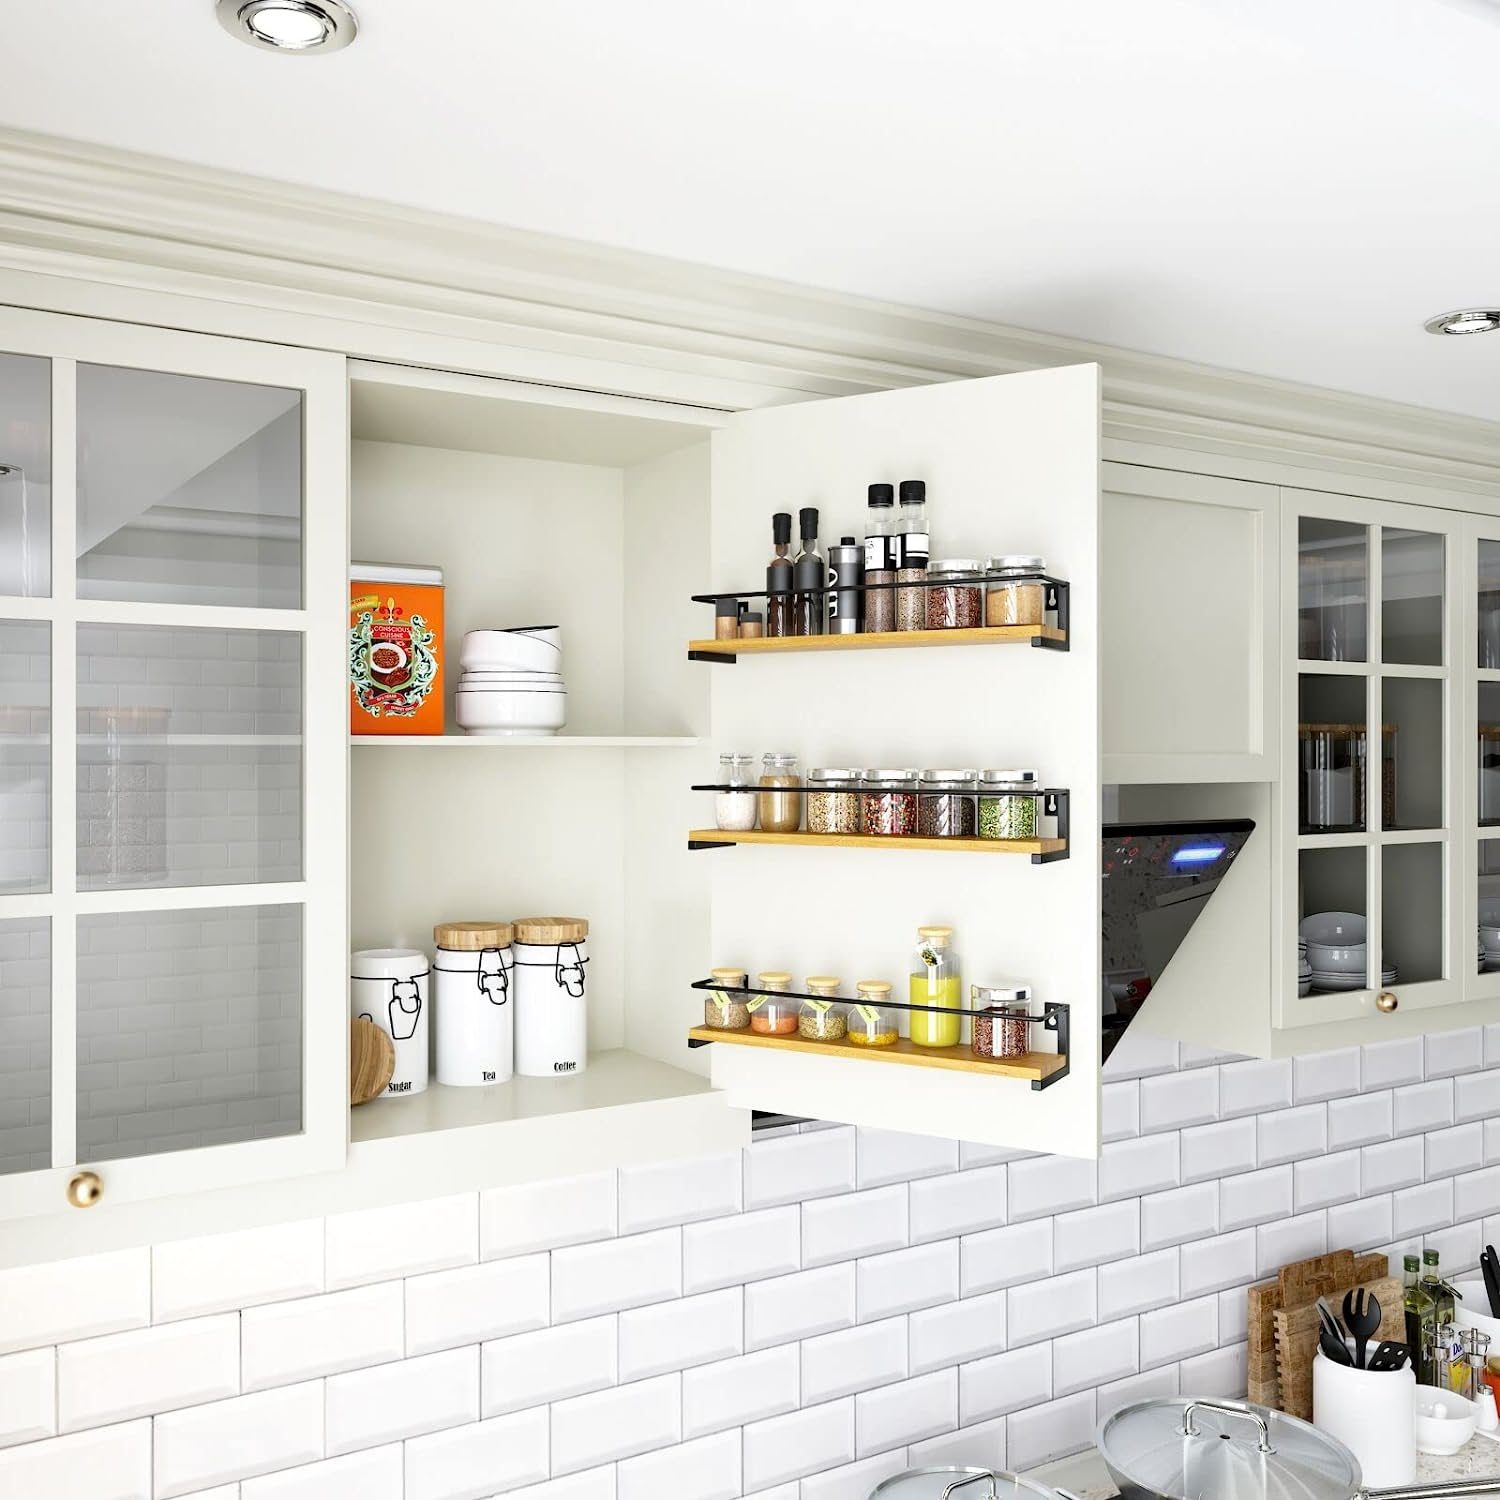 7 Clever Spice Racks To Keep Your Kitchen Organised